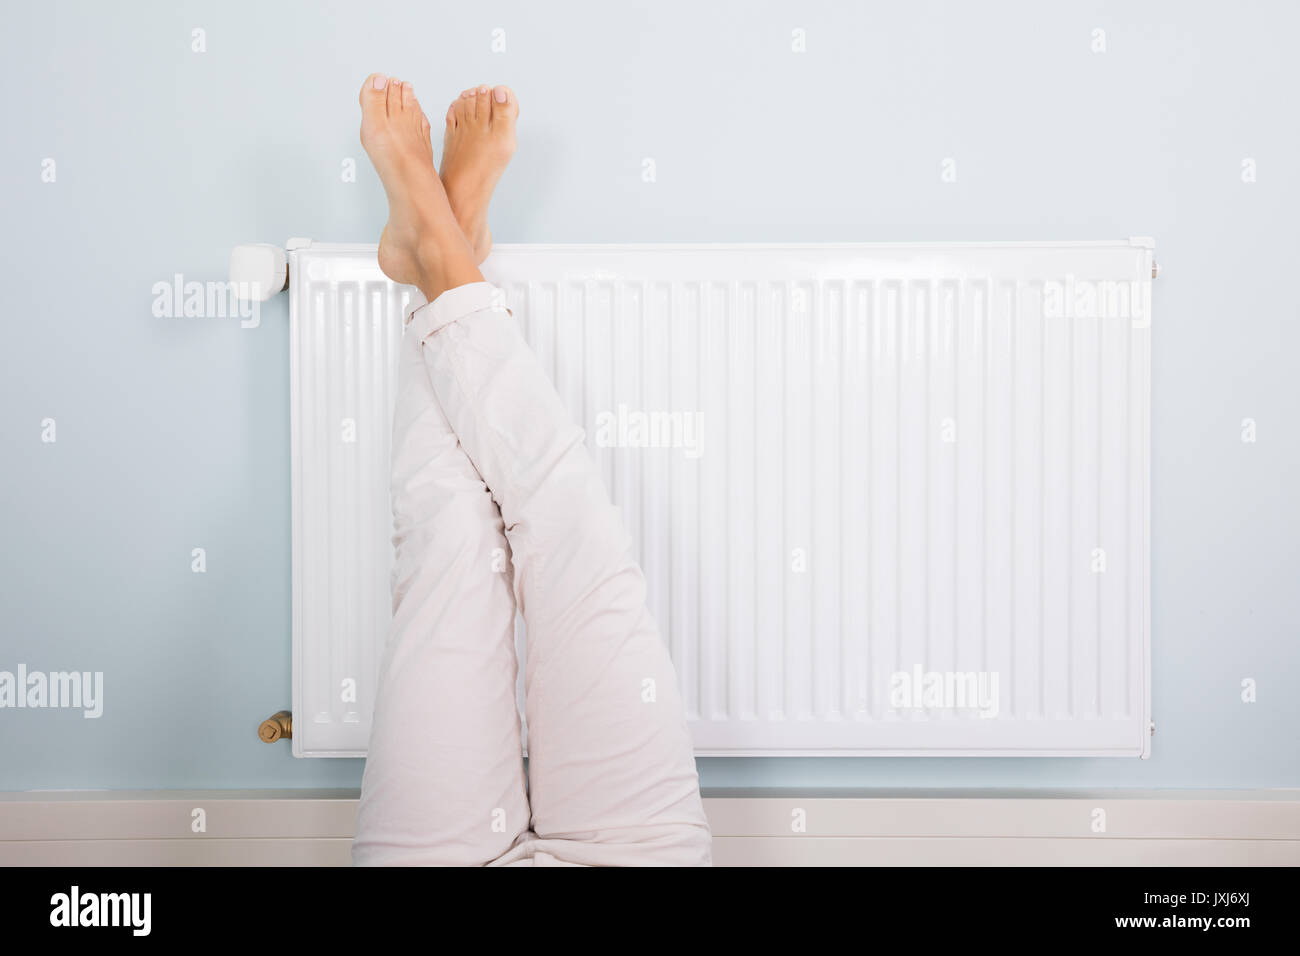 Woman Warming Up Her Feet On White Radiator At Home Stock Photo